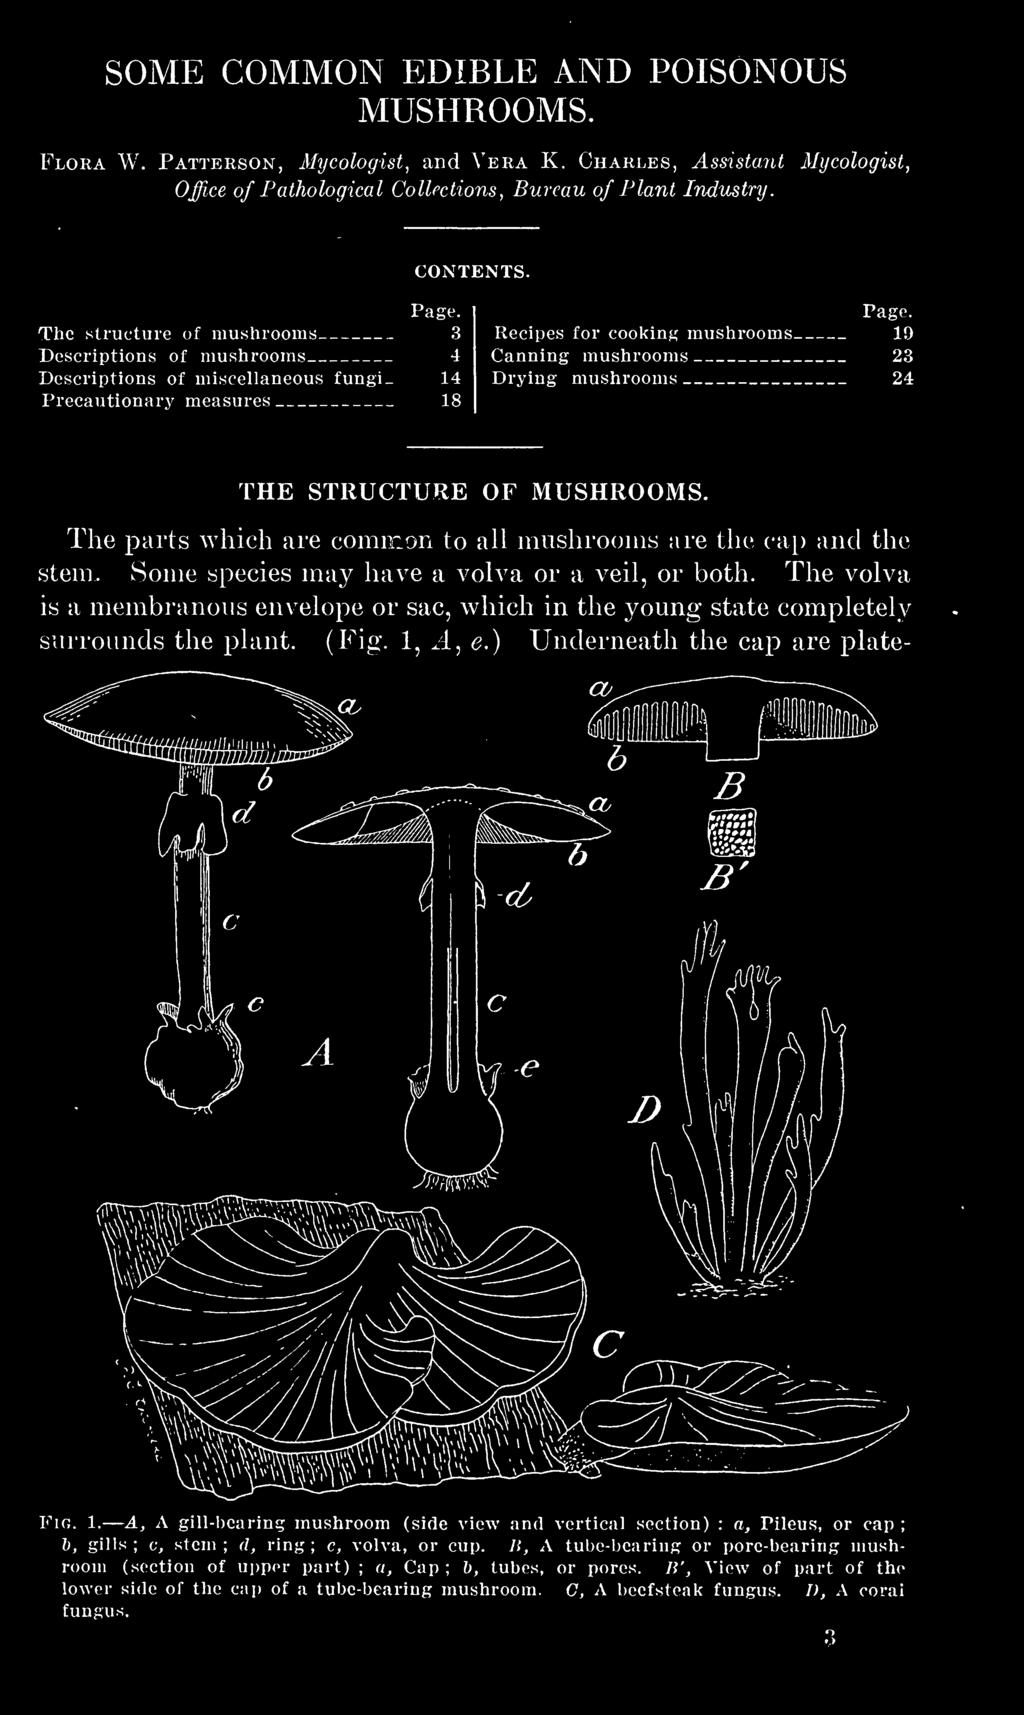 The parts which are common to all mushrooms are the cap and the stem. Some species may have a volva or a veil, or both.